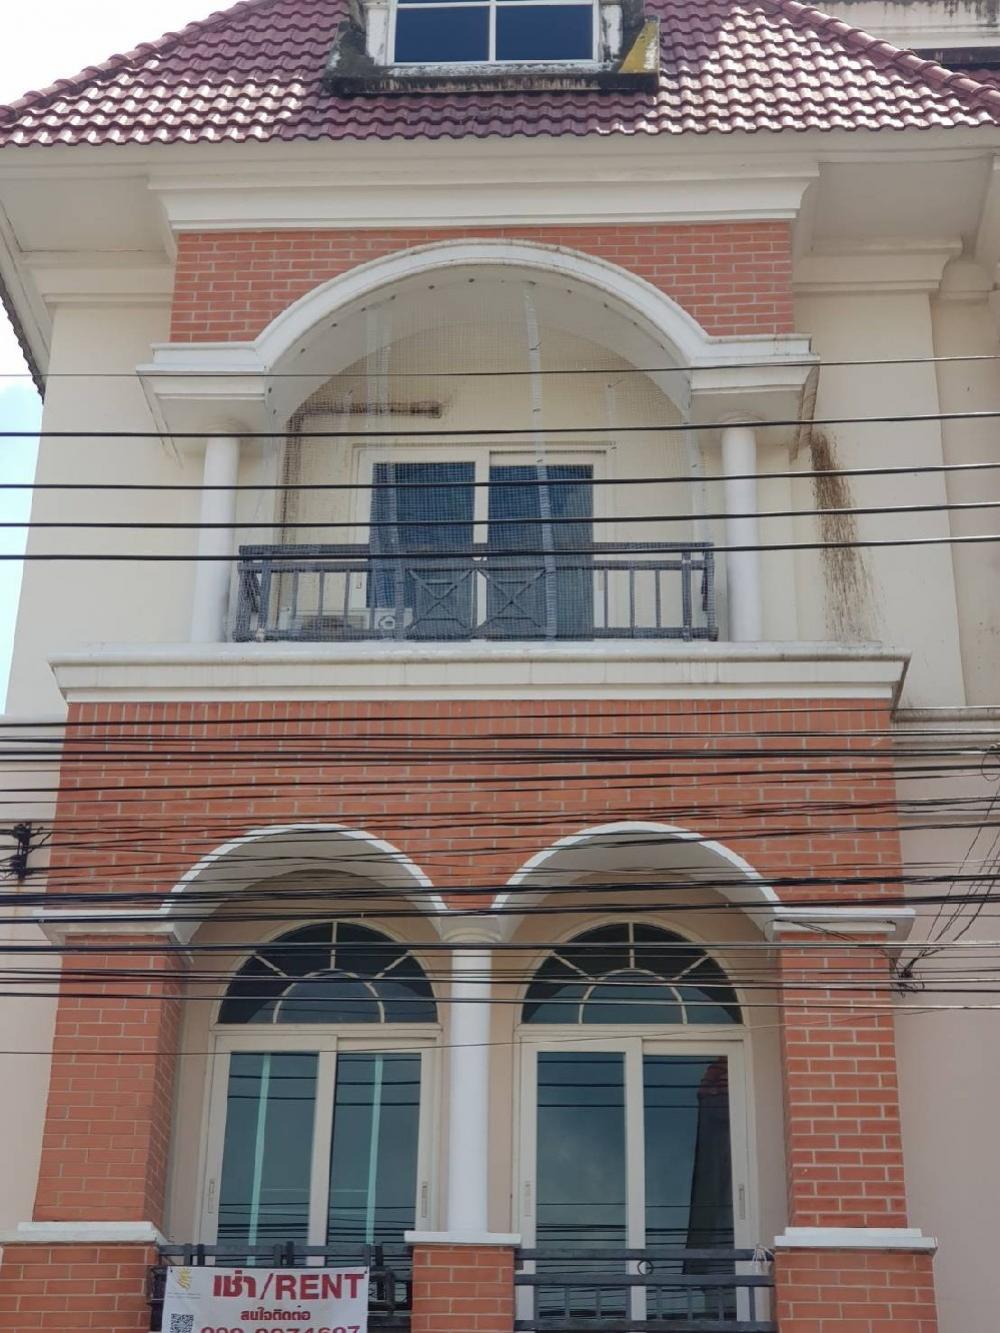 For RentHome OfficeKaset Nawamin,Ladplakao : 📣3-story home office for rent in Sukonthasawat area‼️Casa City Sukonthasawat Village 1, good location, near the expressway, ready to move in, price only 22,000฿/month.